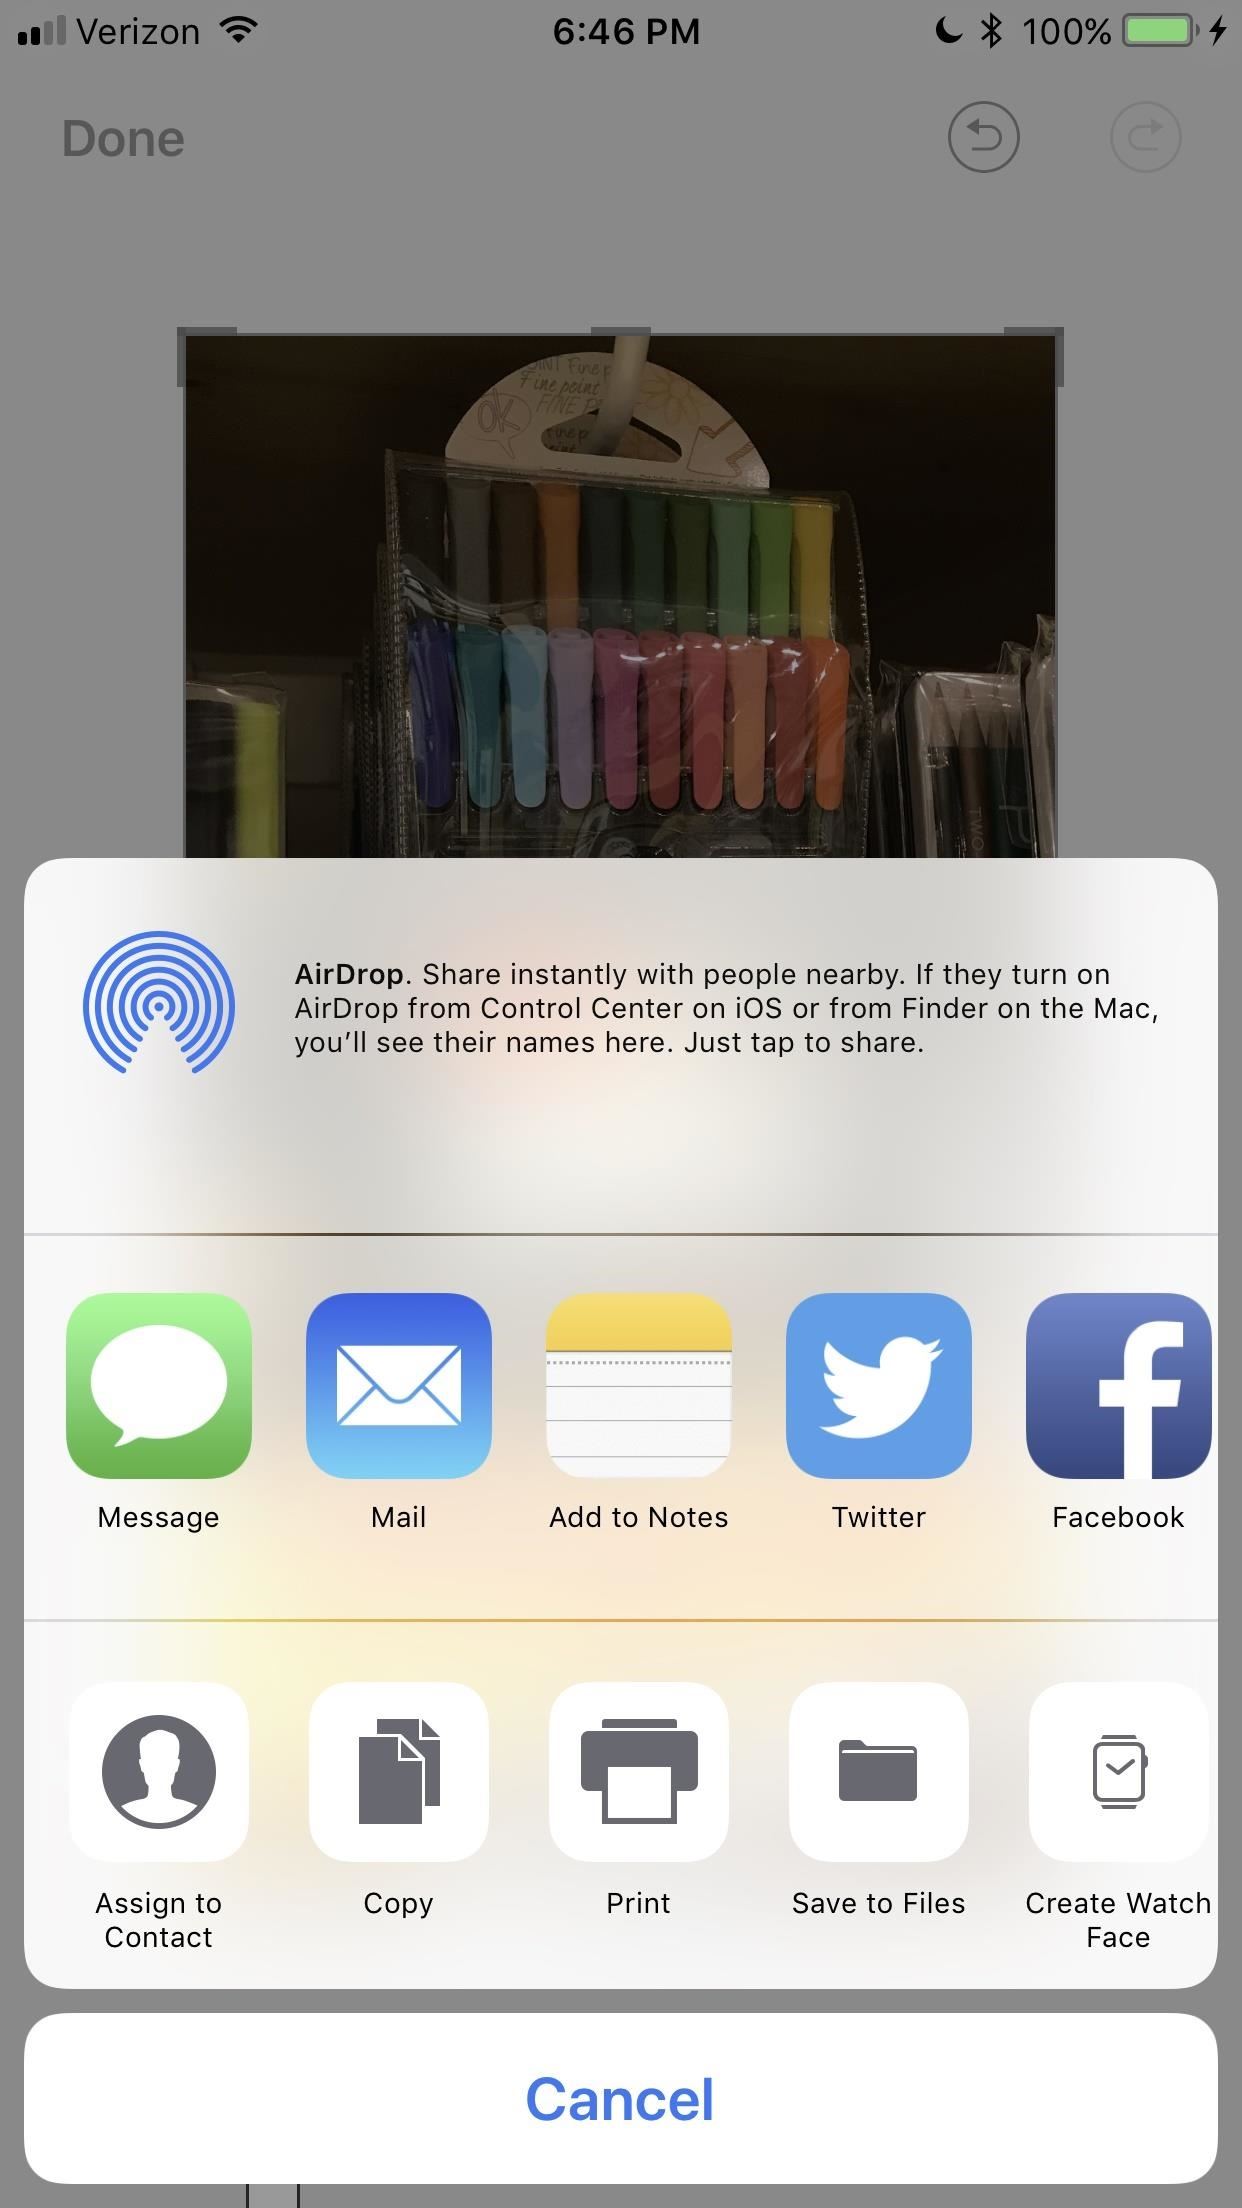 18 Tips for Using Your iPhone's Screenshot Tools